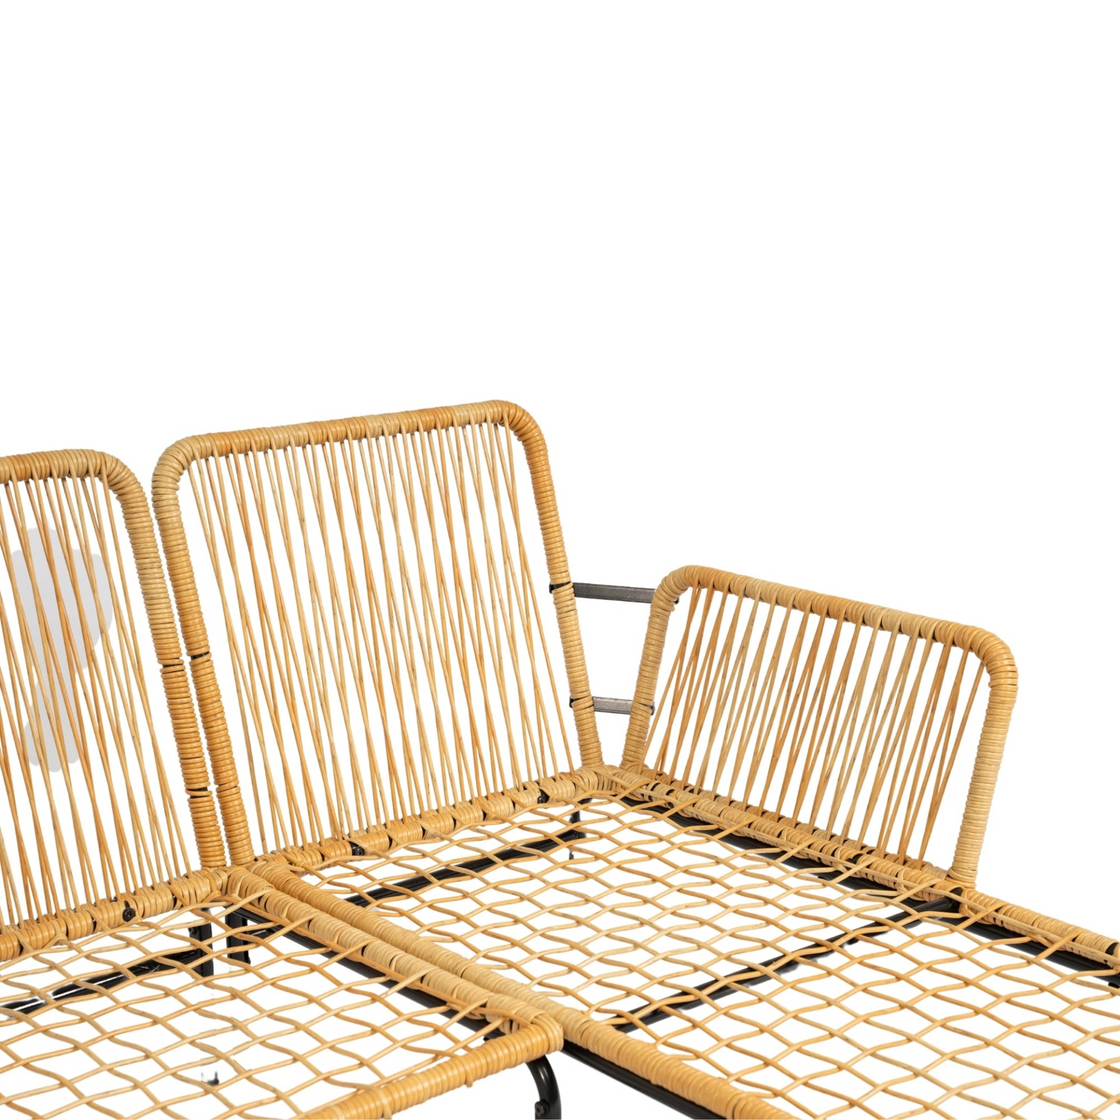 3 Pieces Outdoor Patio Wicker Furniture Sets - Natural Yellow Wicker + Creme Cushion